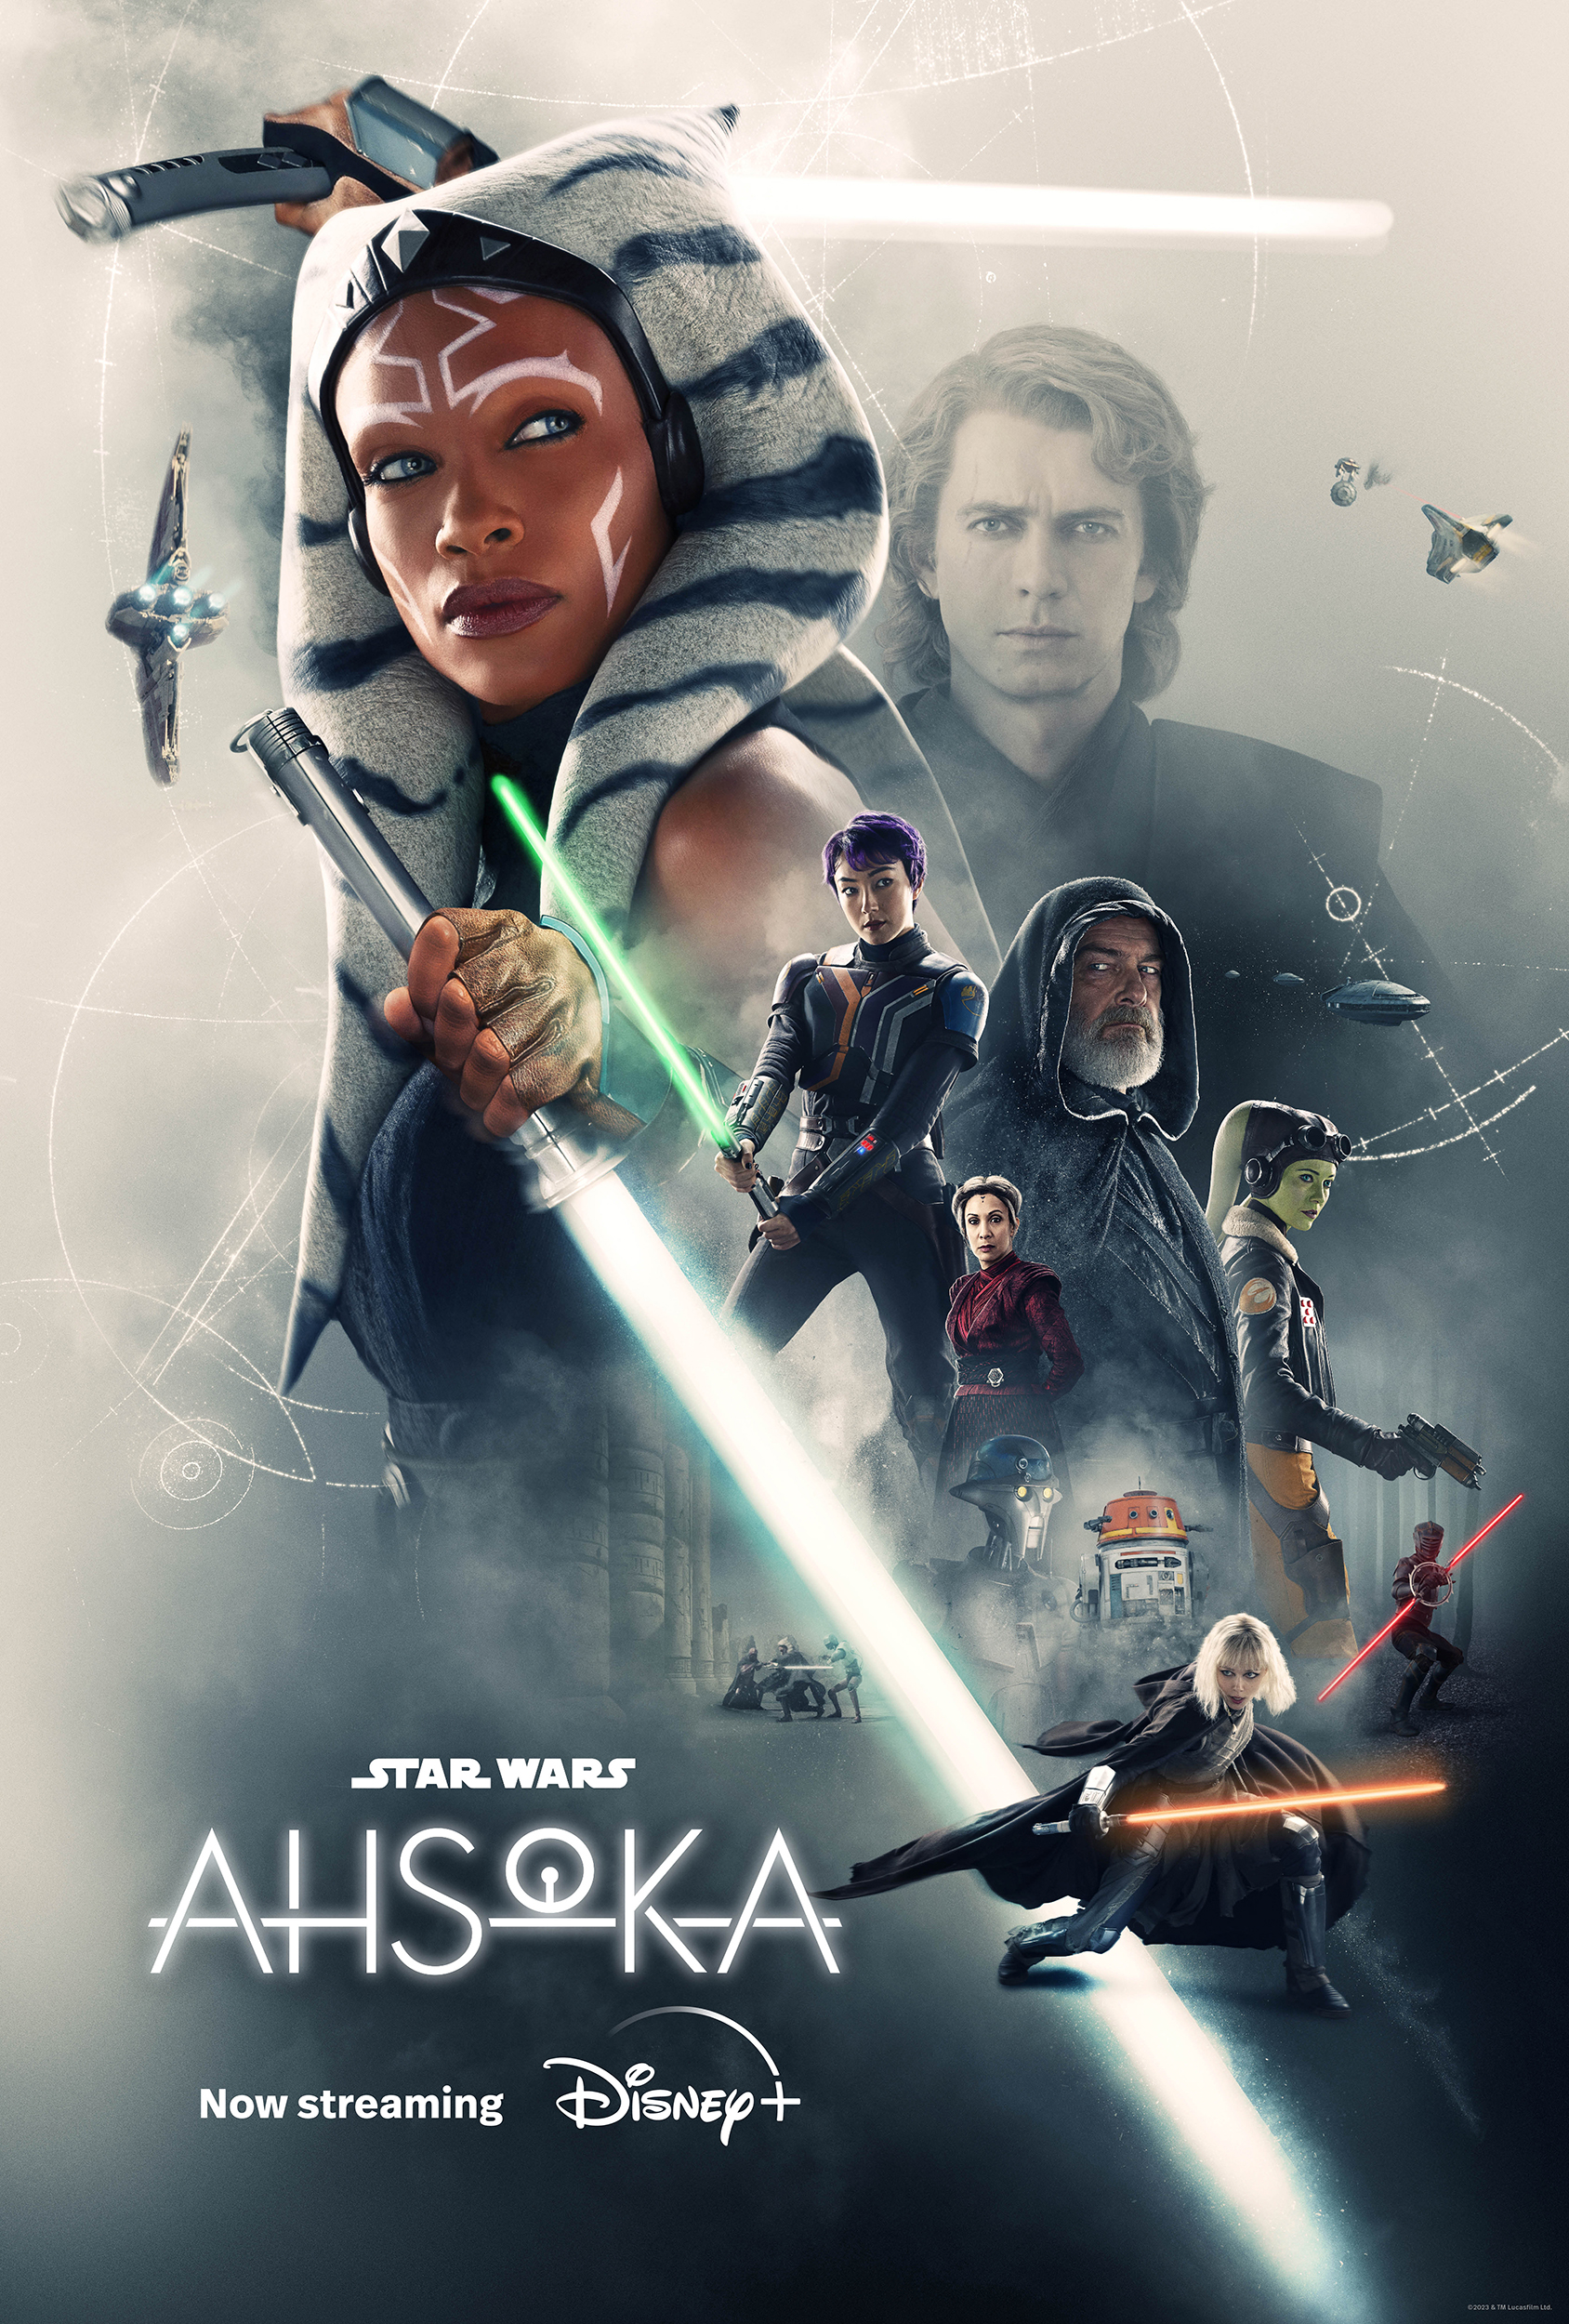 Ahsoka New Poster Revealed, Spoiler Discussion on Which Iteration of